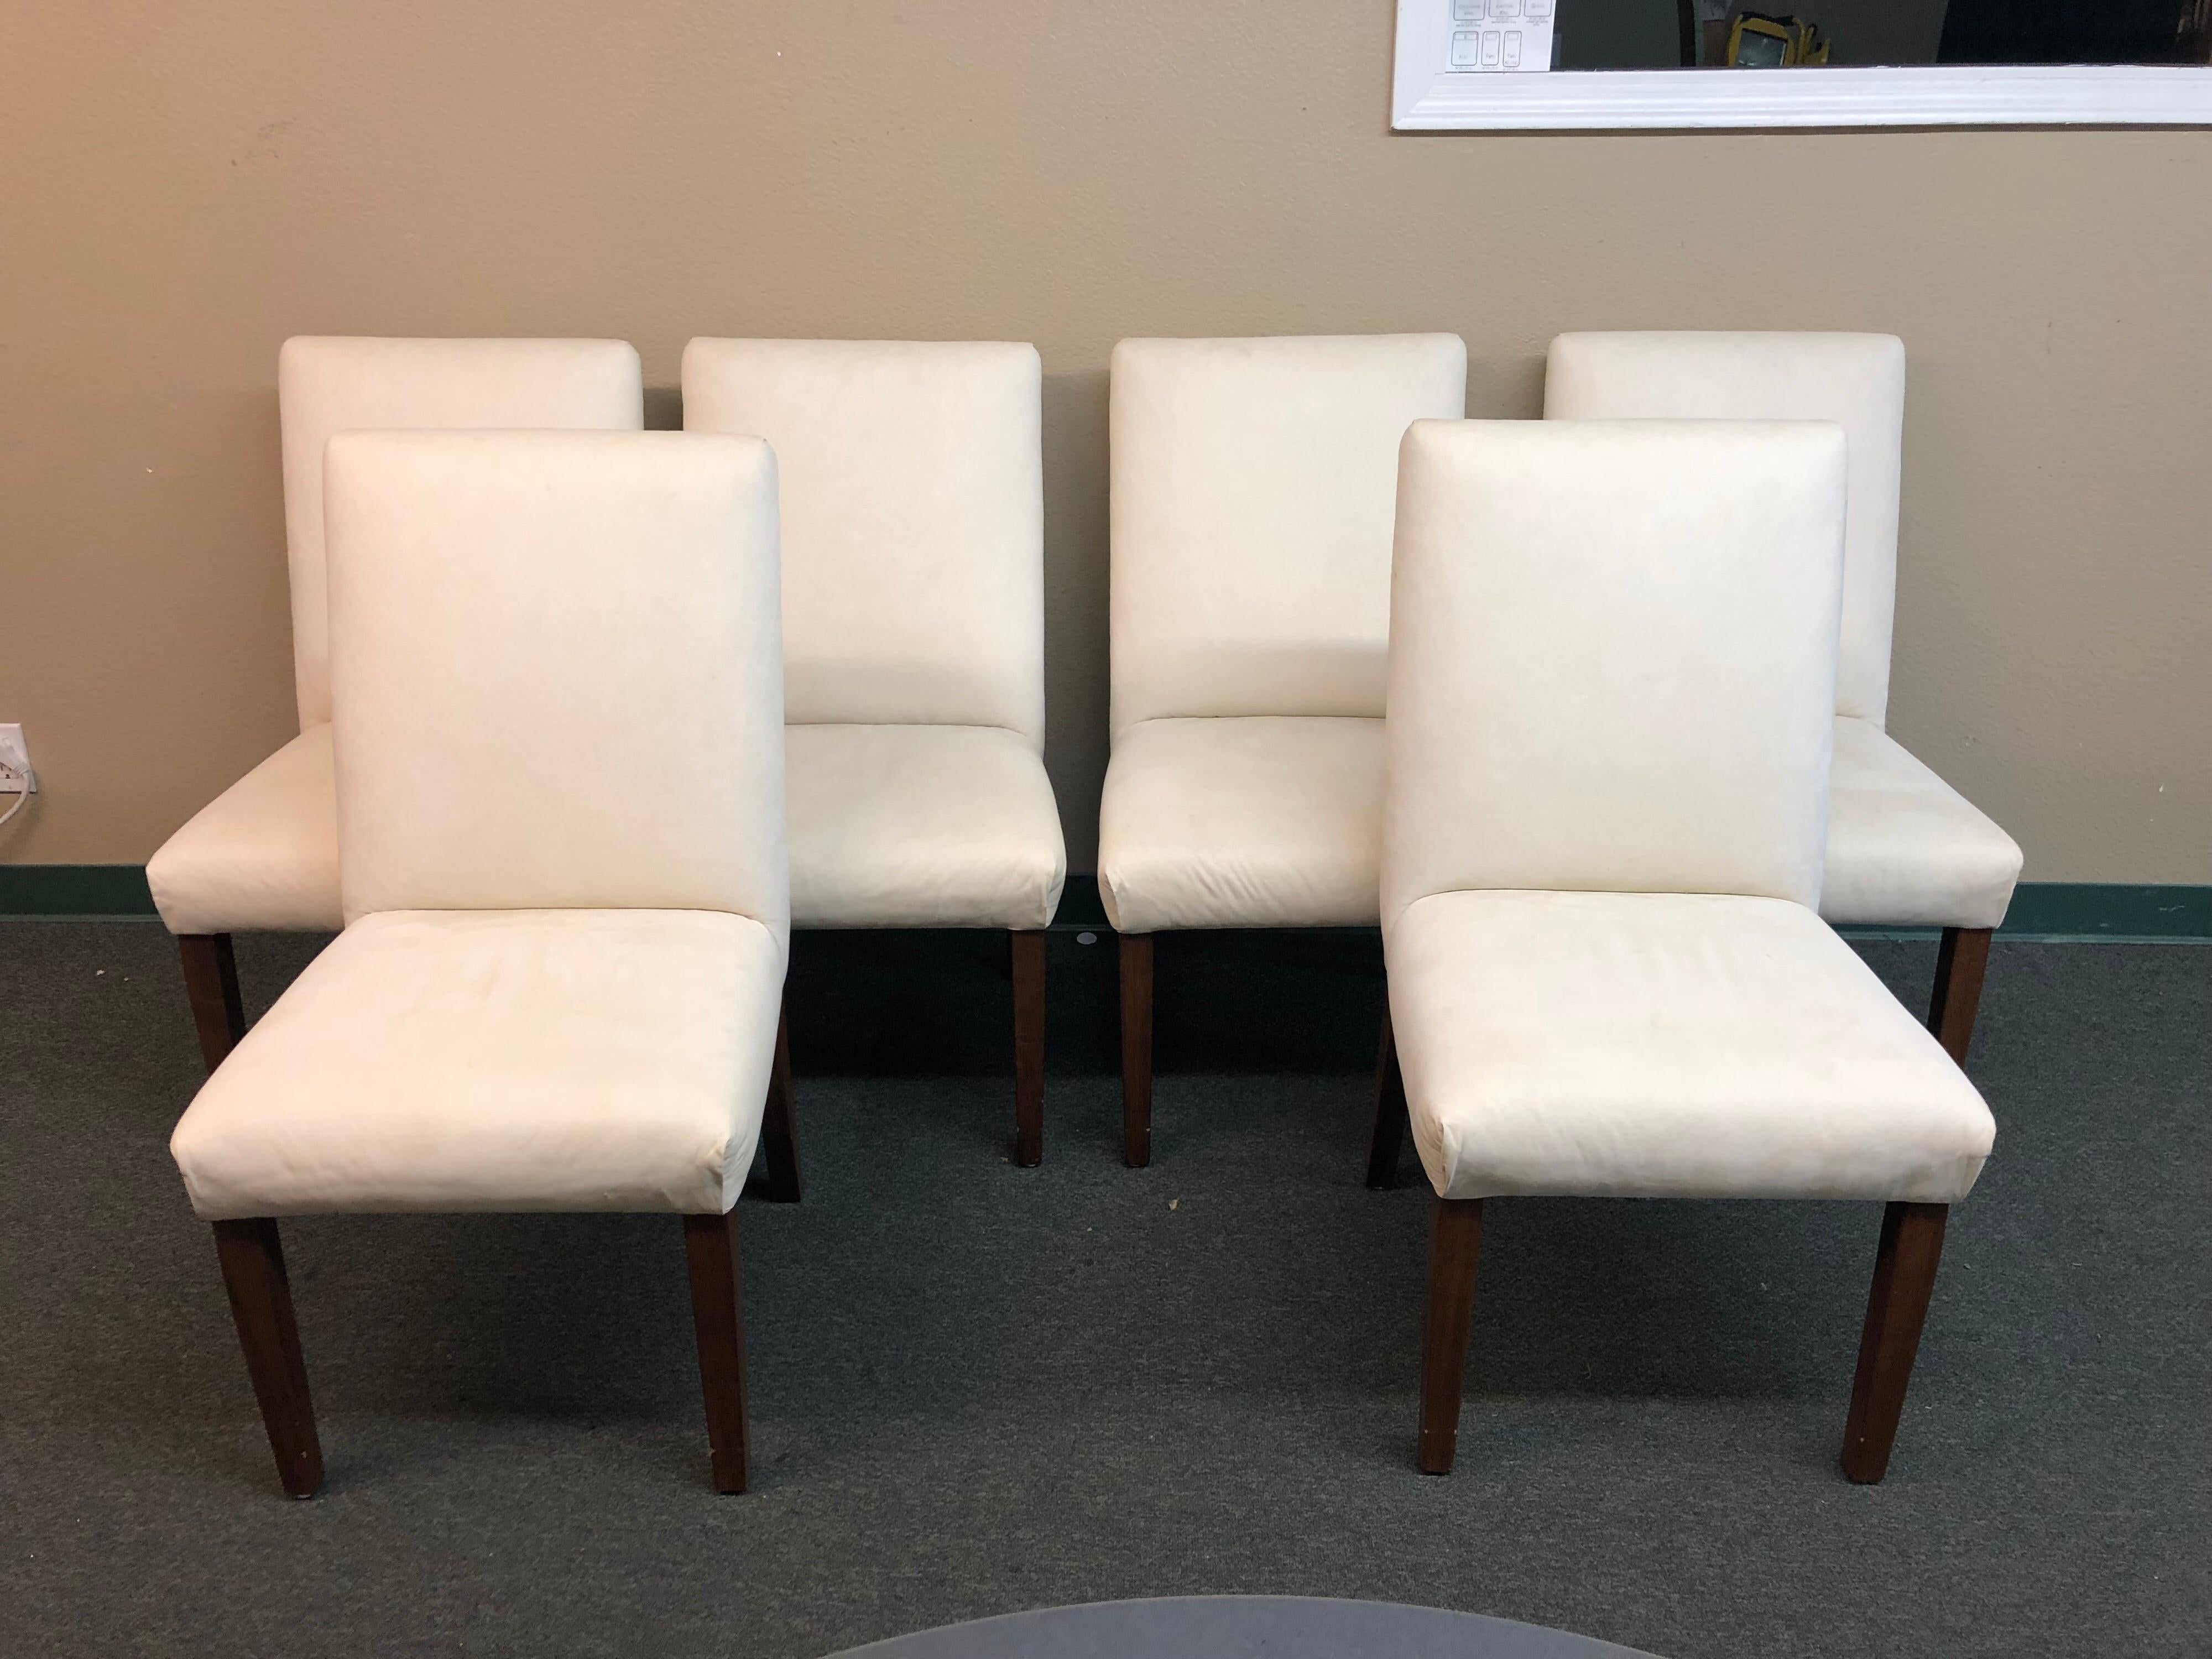 A custom set of dining chairs. Six beautiful ivory suede seats sit on tapered espresso legs. A lovely neutral set of chairs for your stunning table.
 